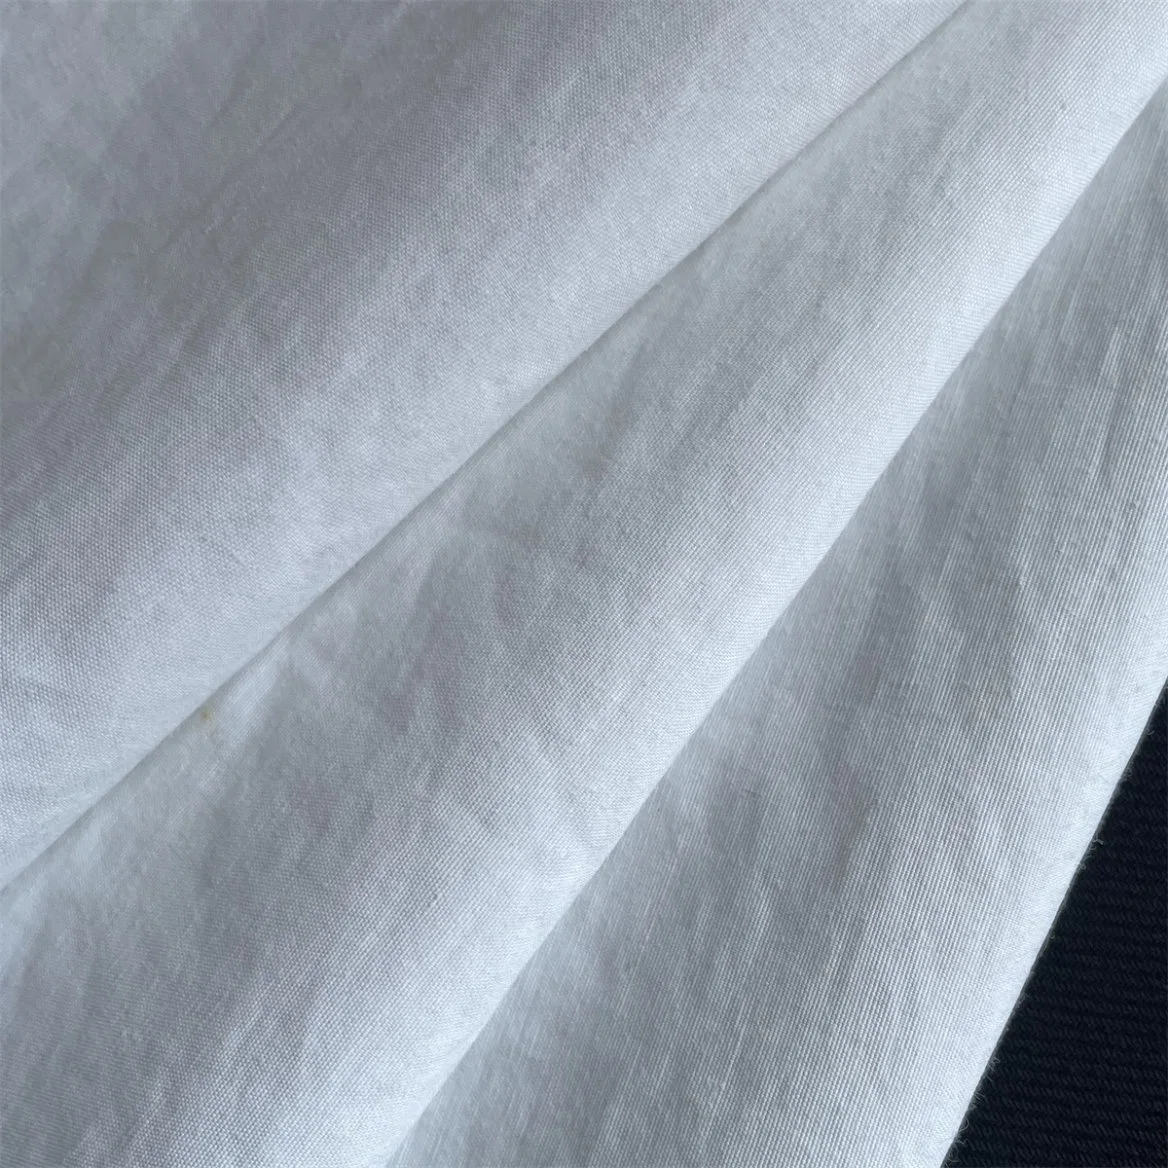 Full-Dull 32s Cotton/Nylon Plain Weave Whitening Fabric for Pants and Casual Cloth